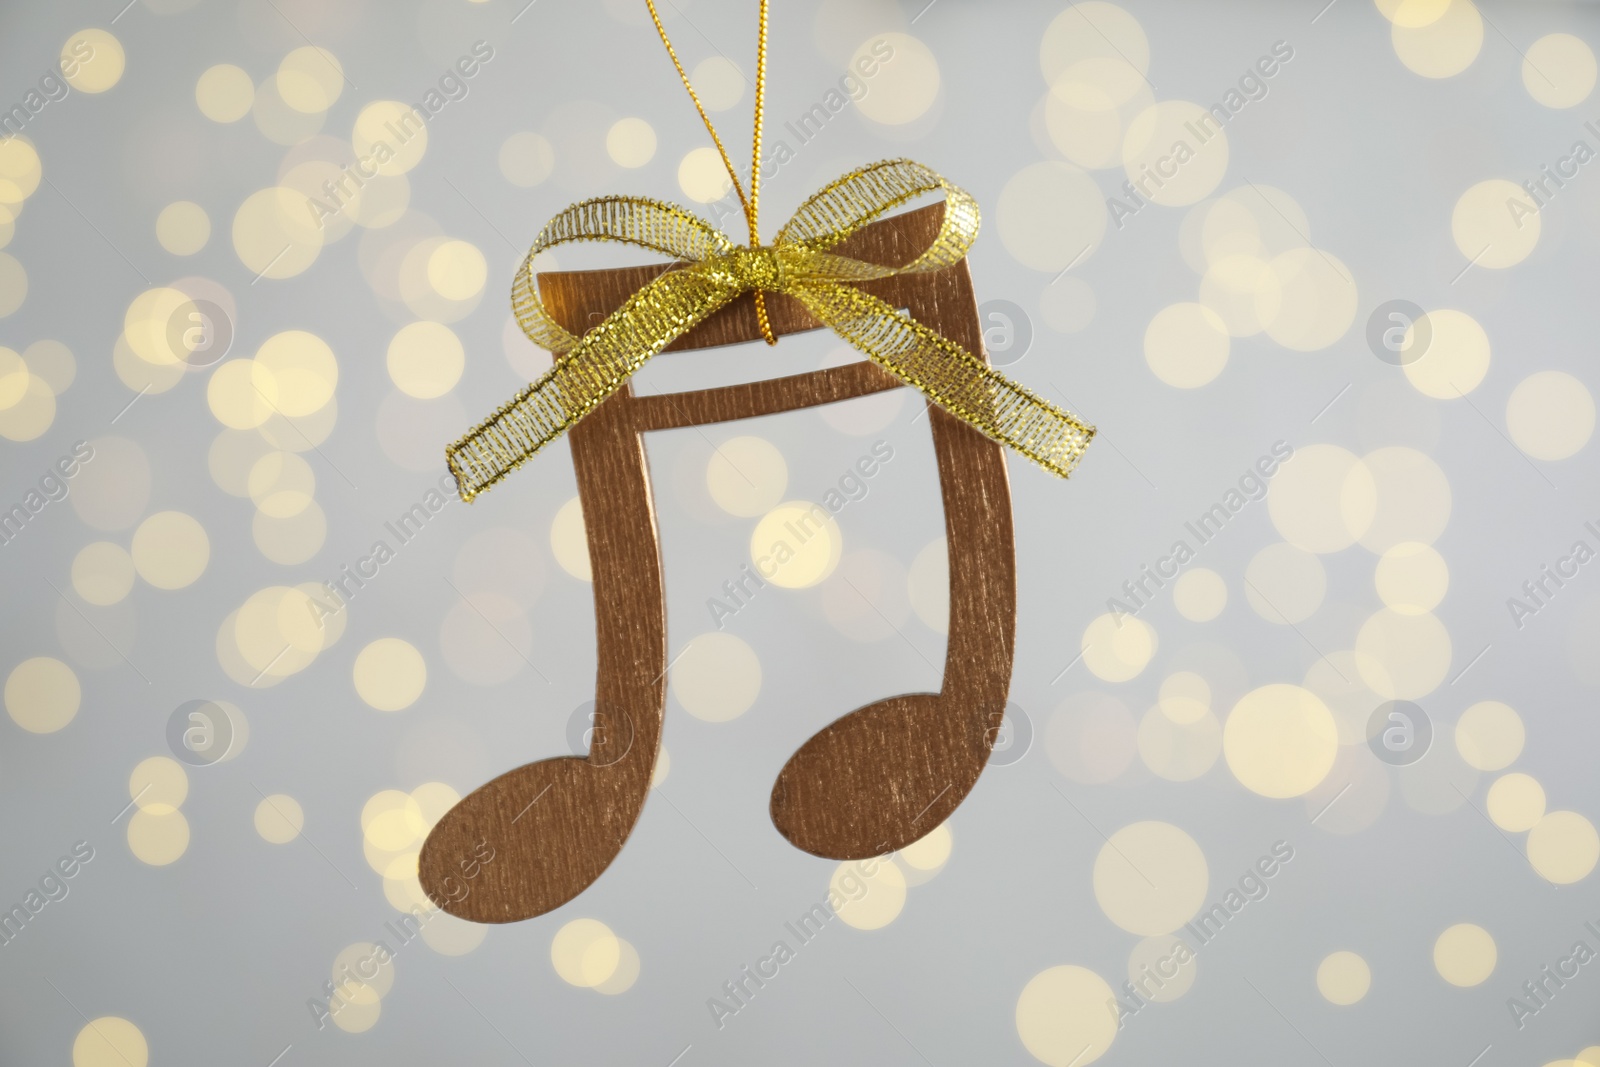 Photo of Wooden music note with golden bow hanging on light grey background with blurred Christmas lights